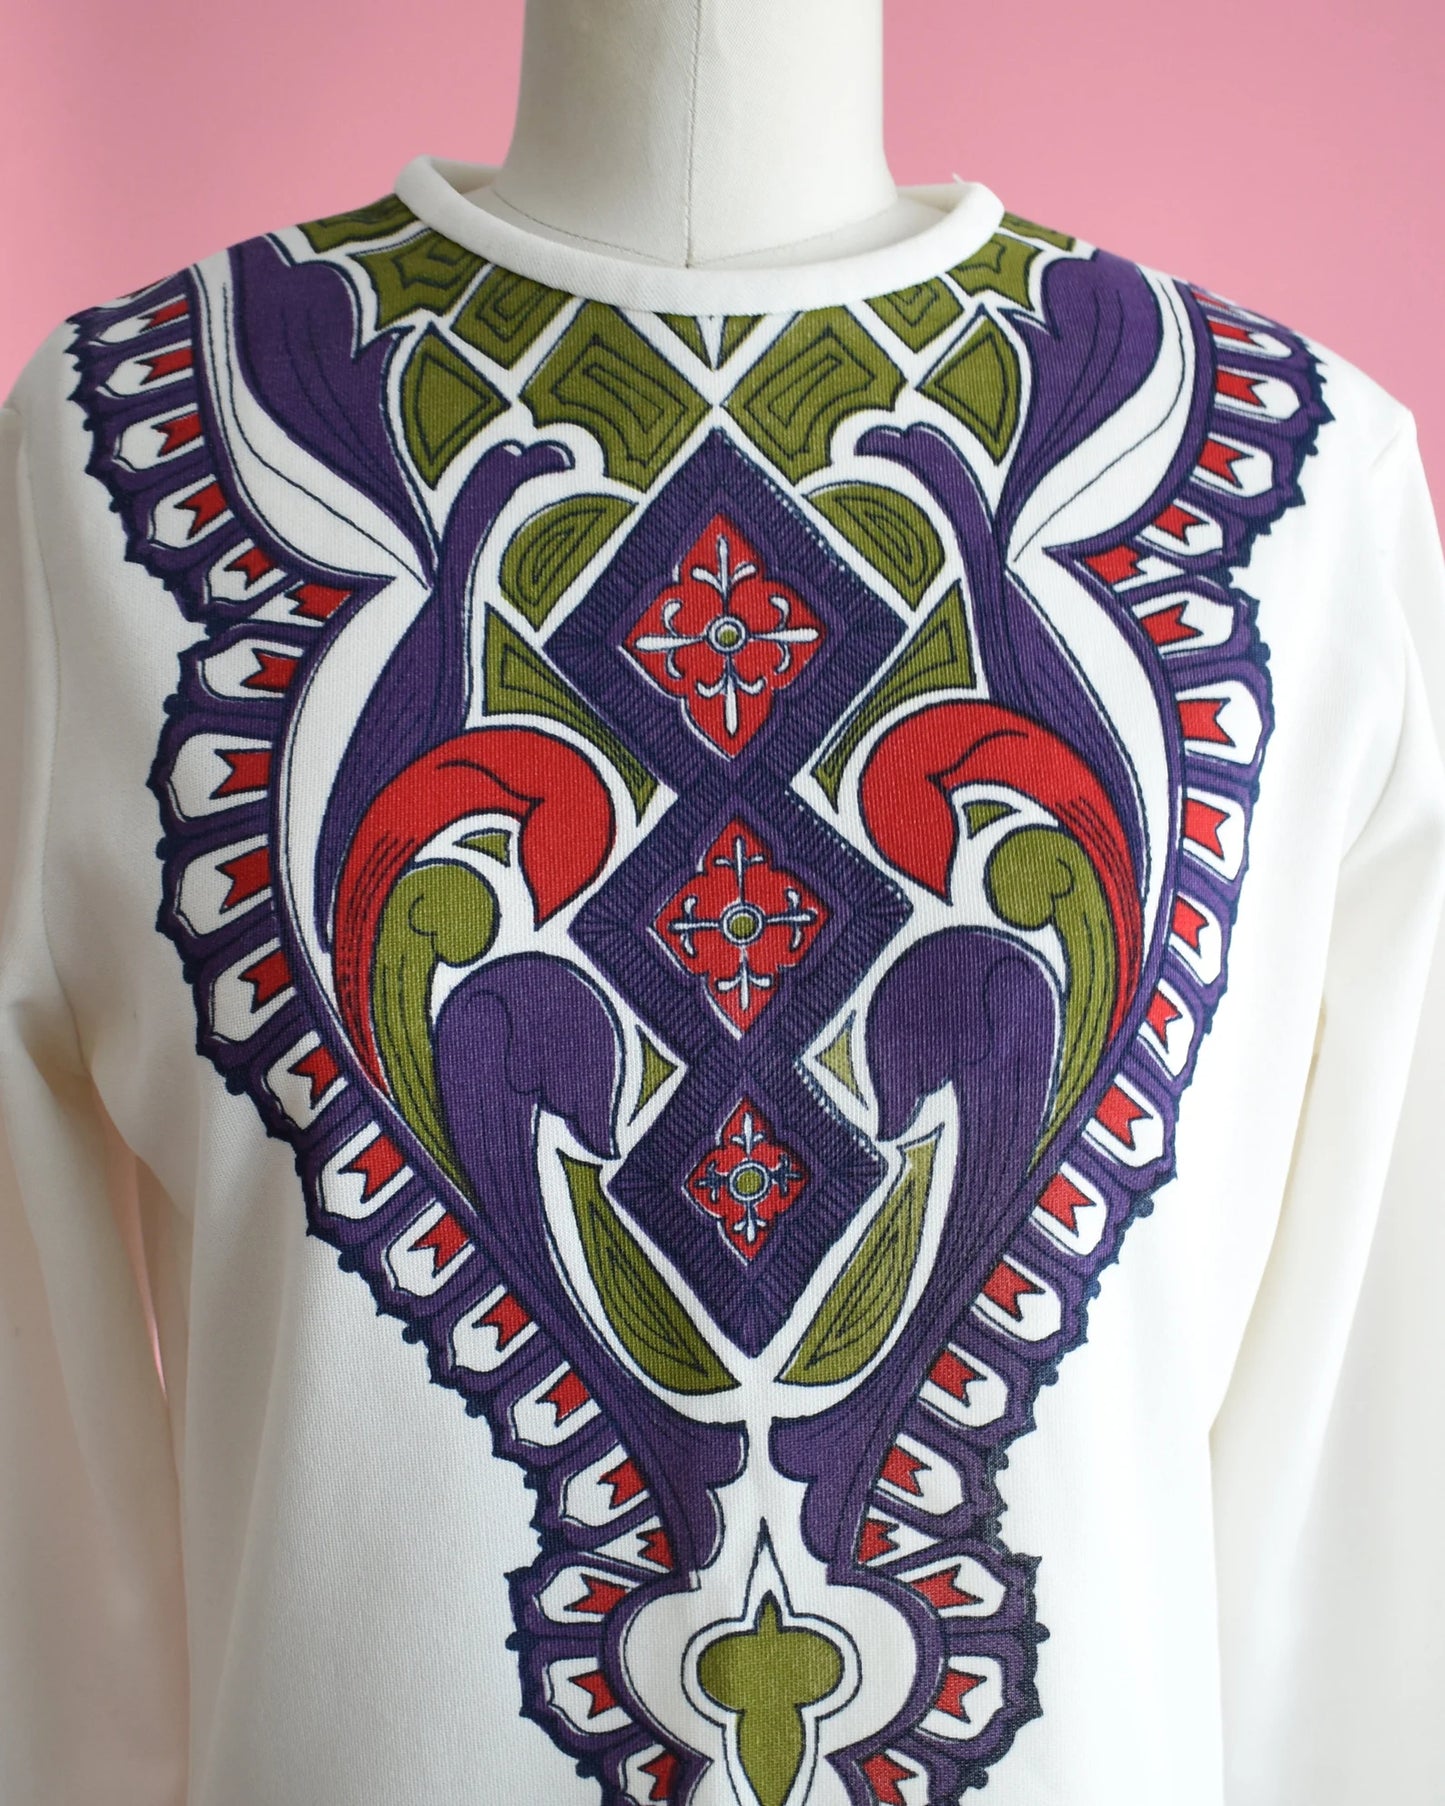 Close up of the psychedelic print on the tunic